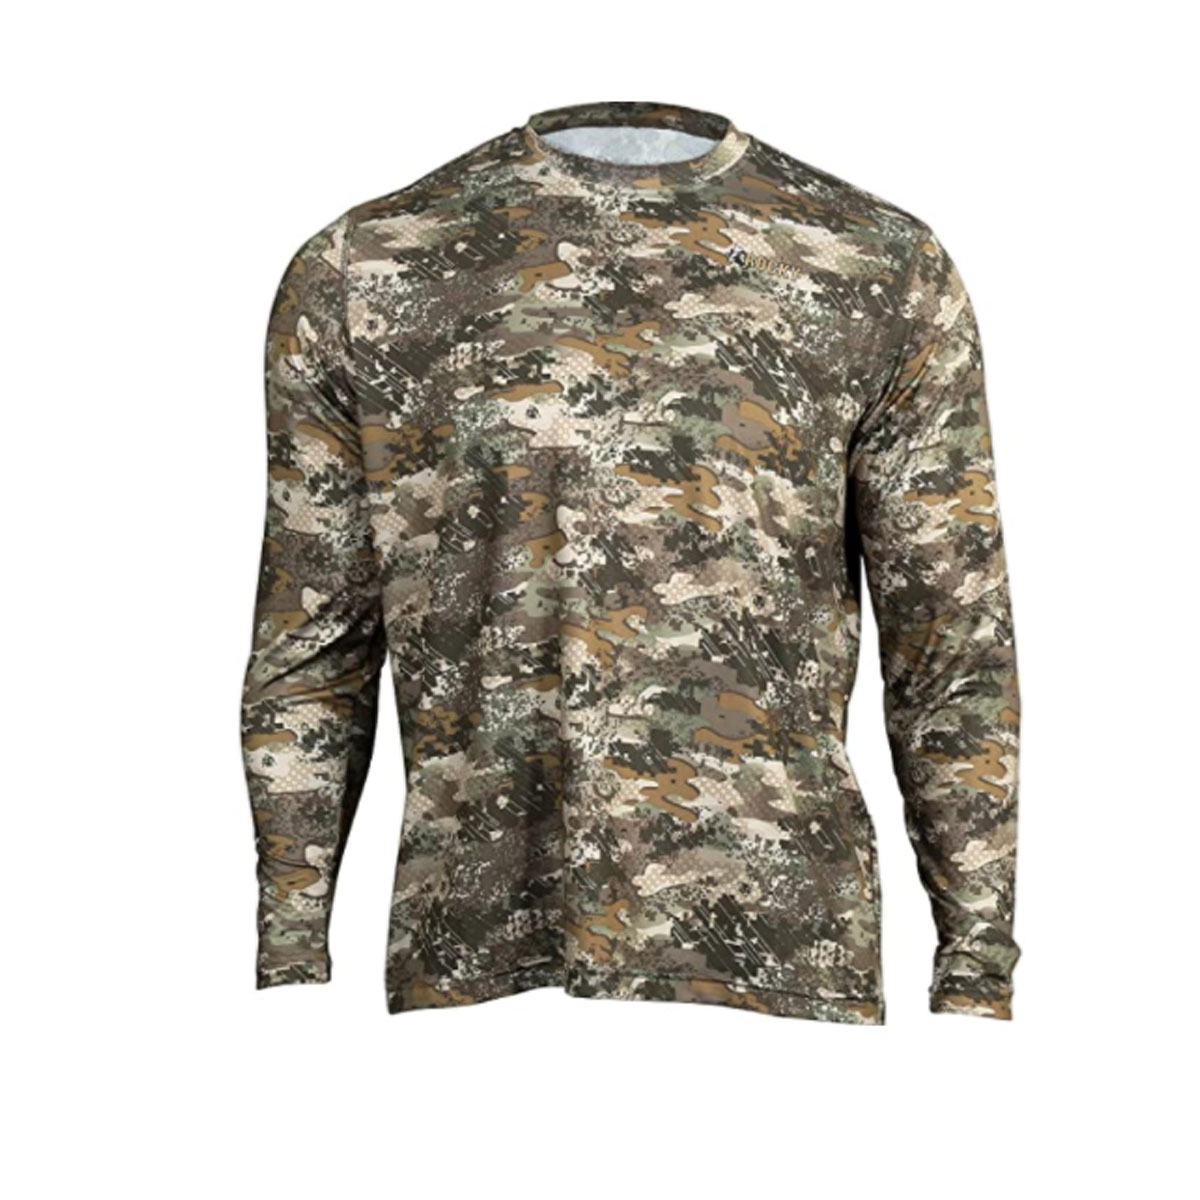 Camofire Discount Hunting Gear, Camo and Clothing